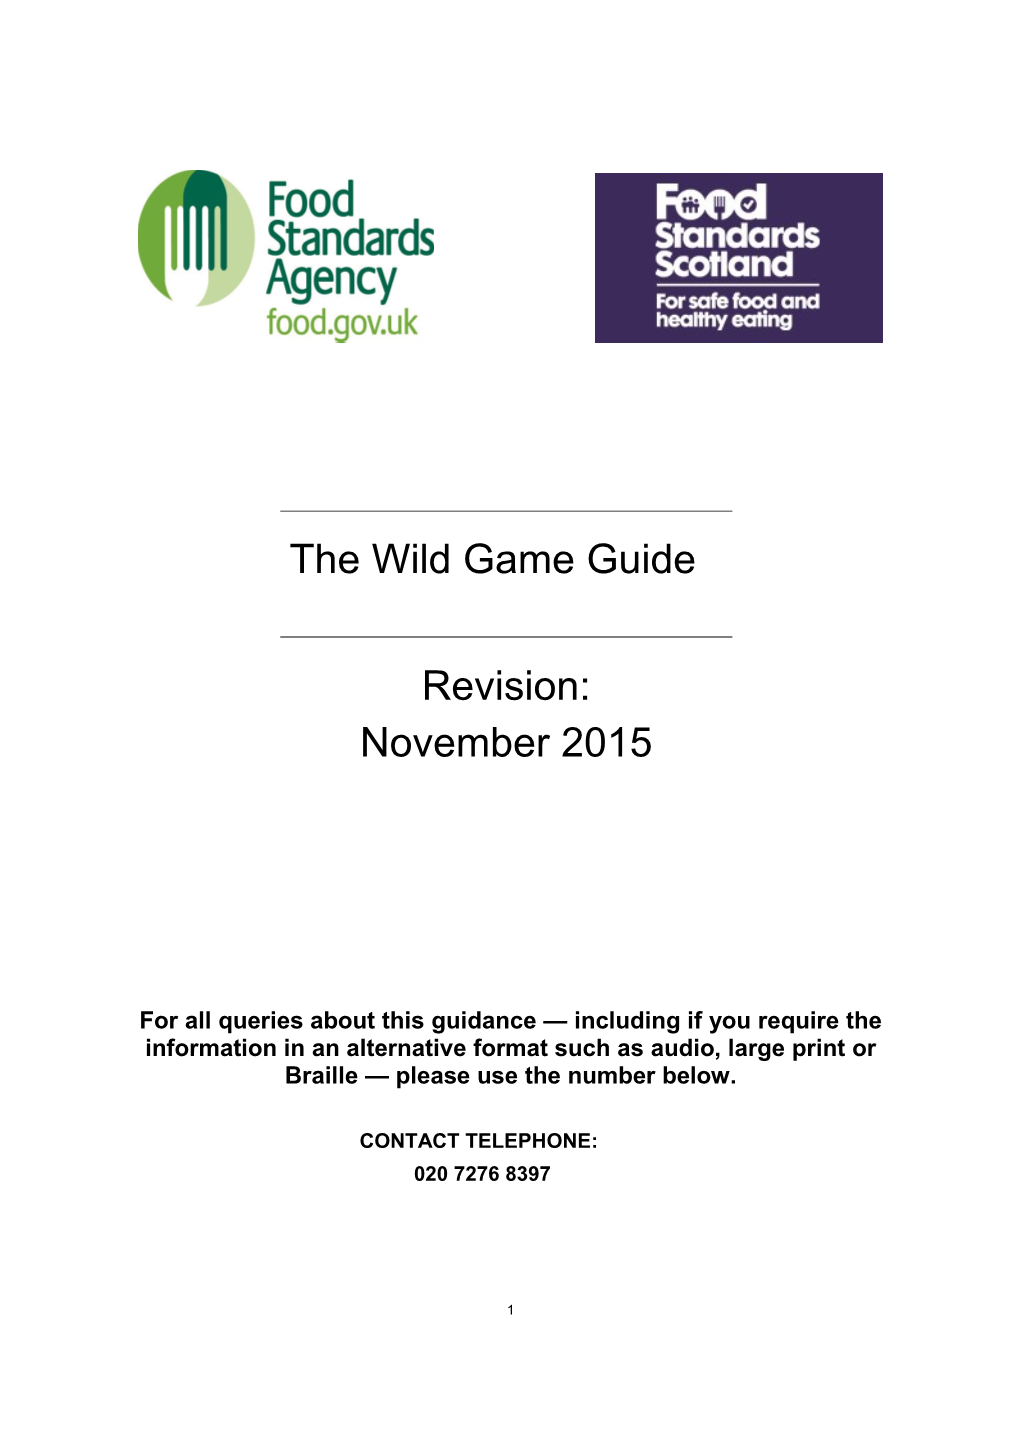 Wild Game Guide